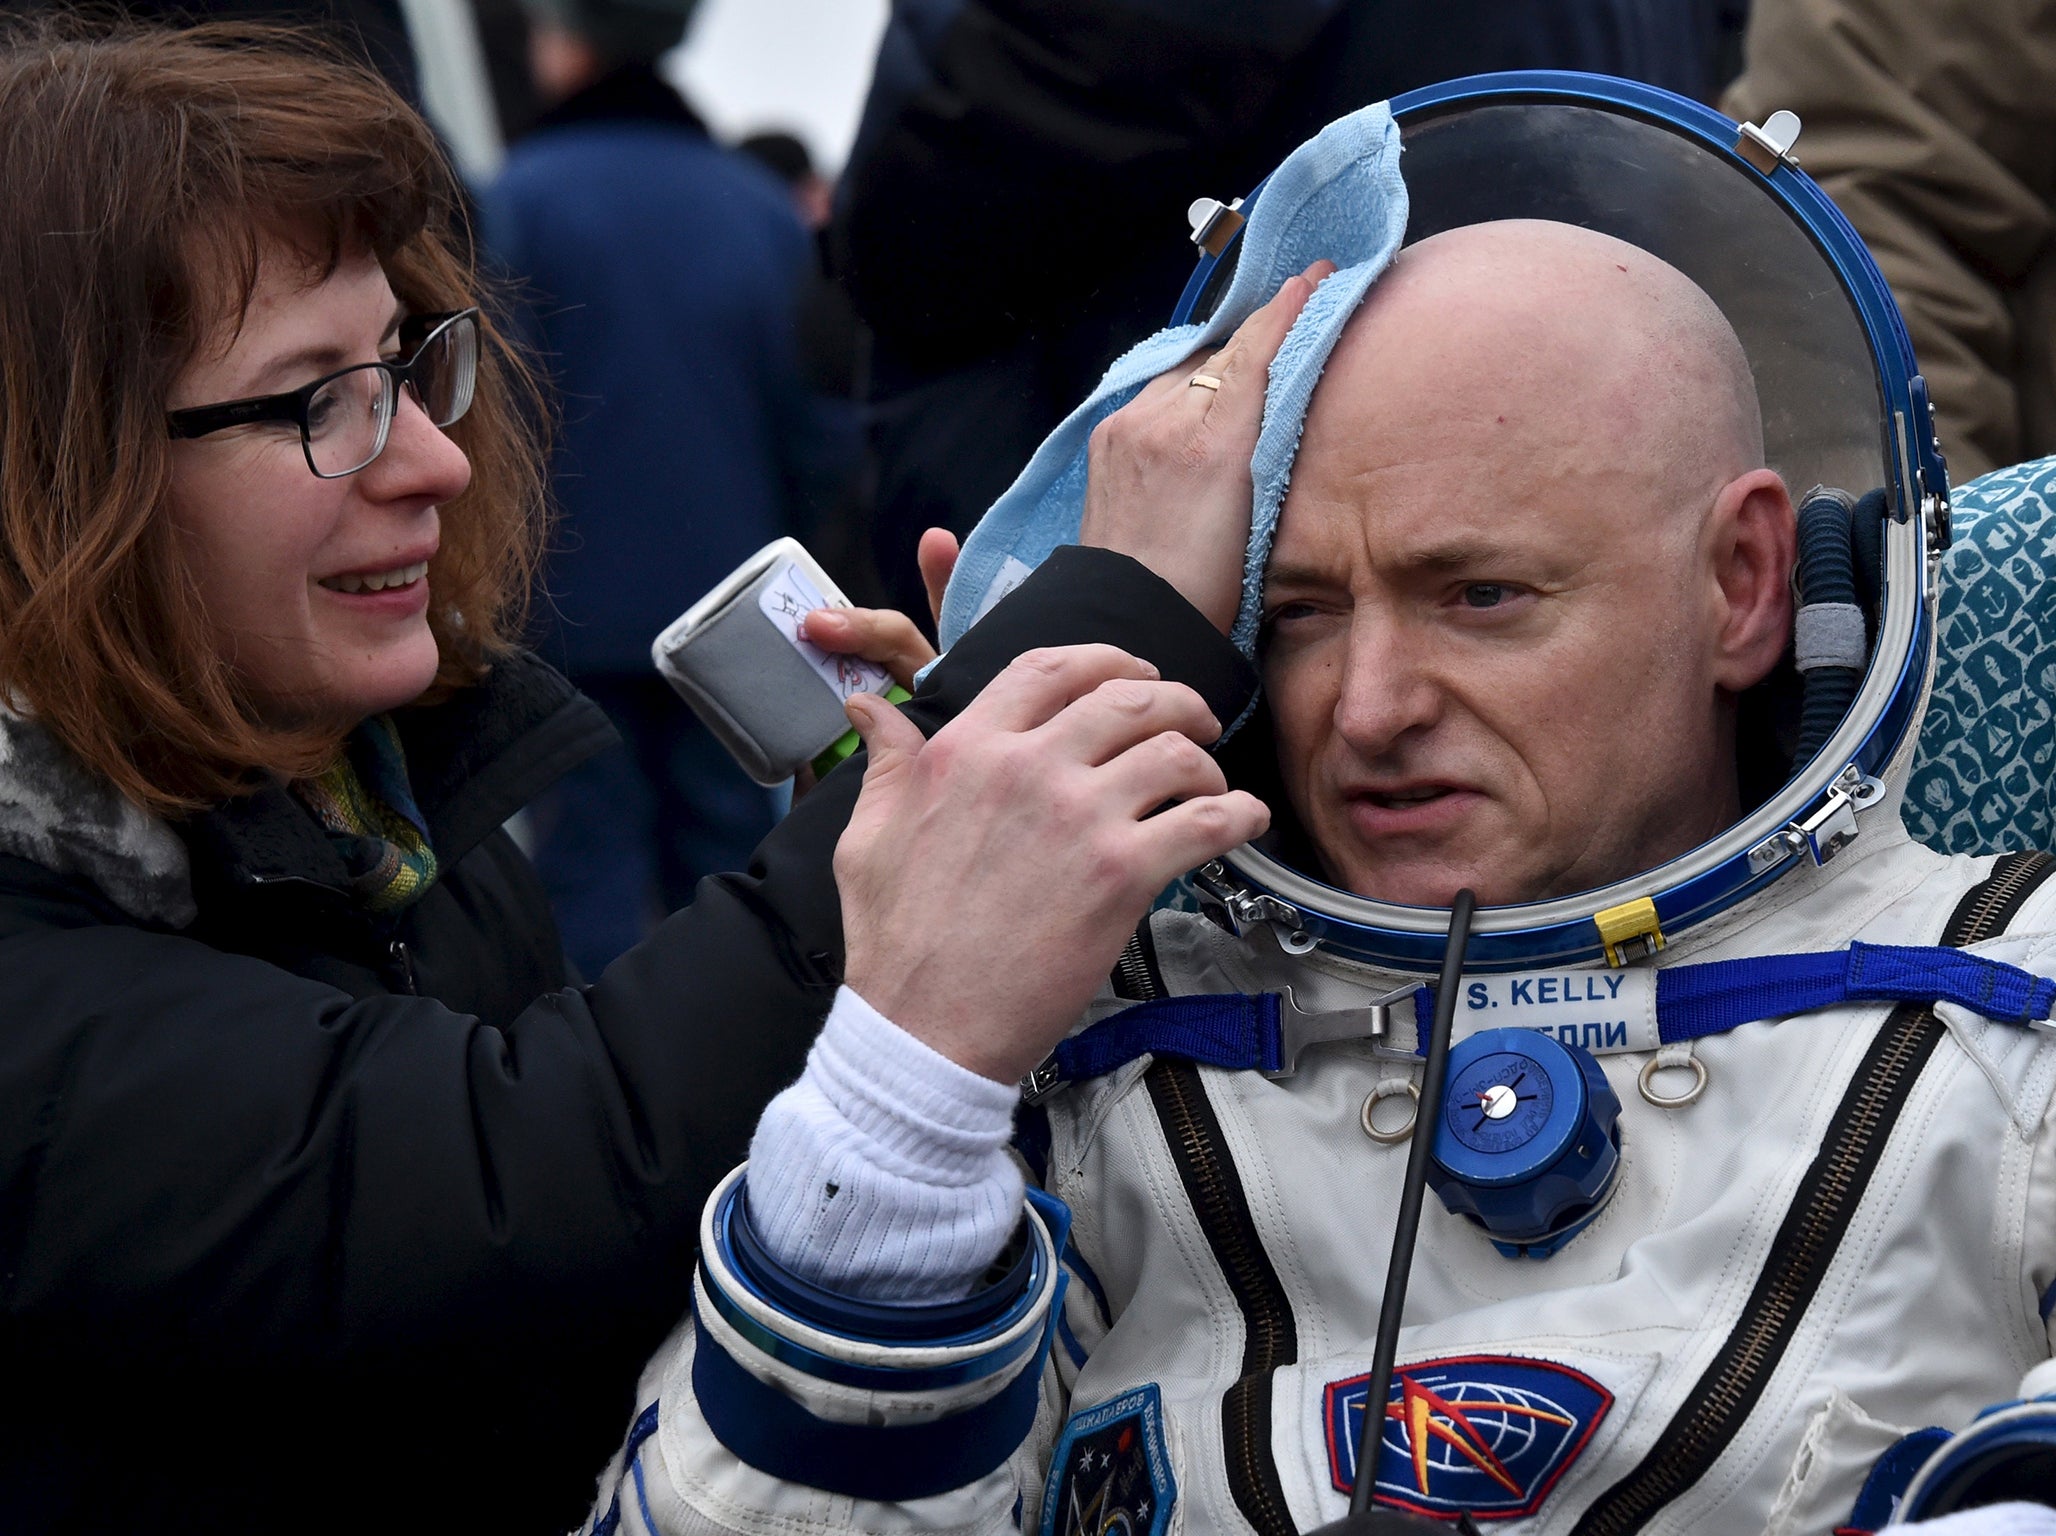 U.S. astronaut Scott Kelly is assisted by ground personnel shortly after landing near the town of Dzhezkazgan